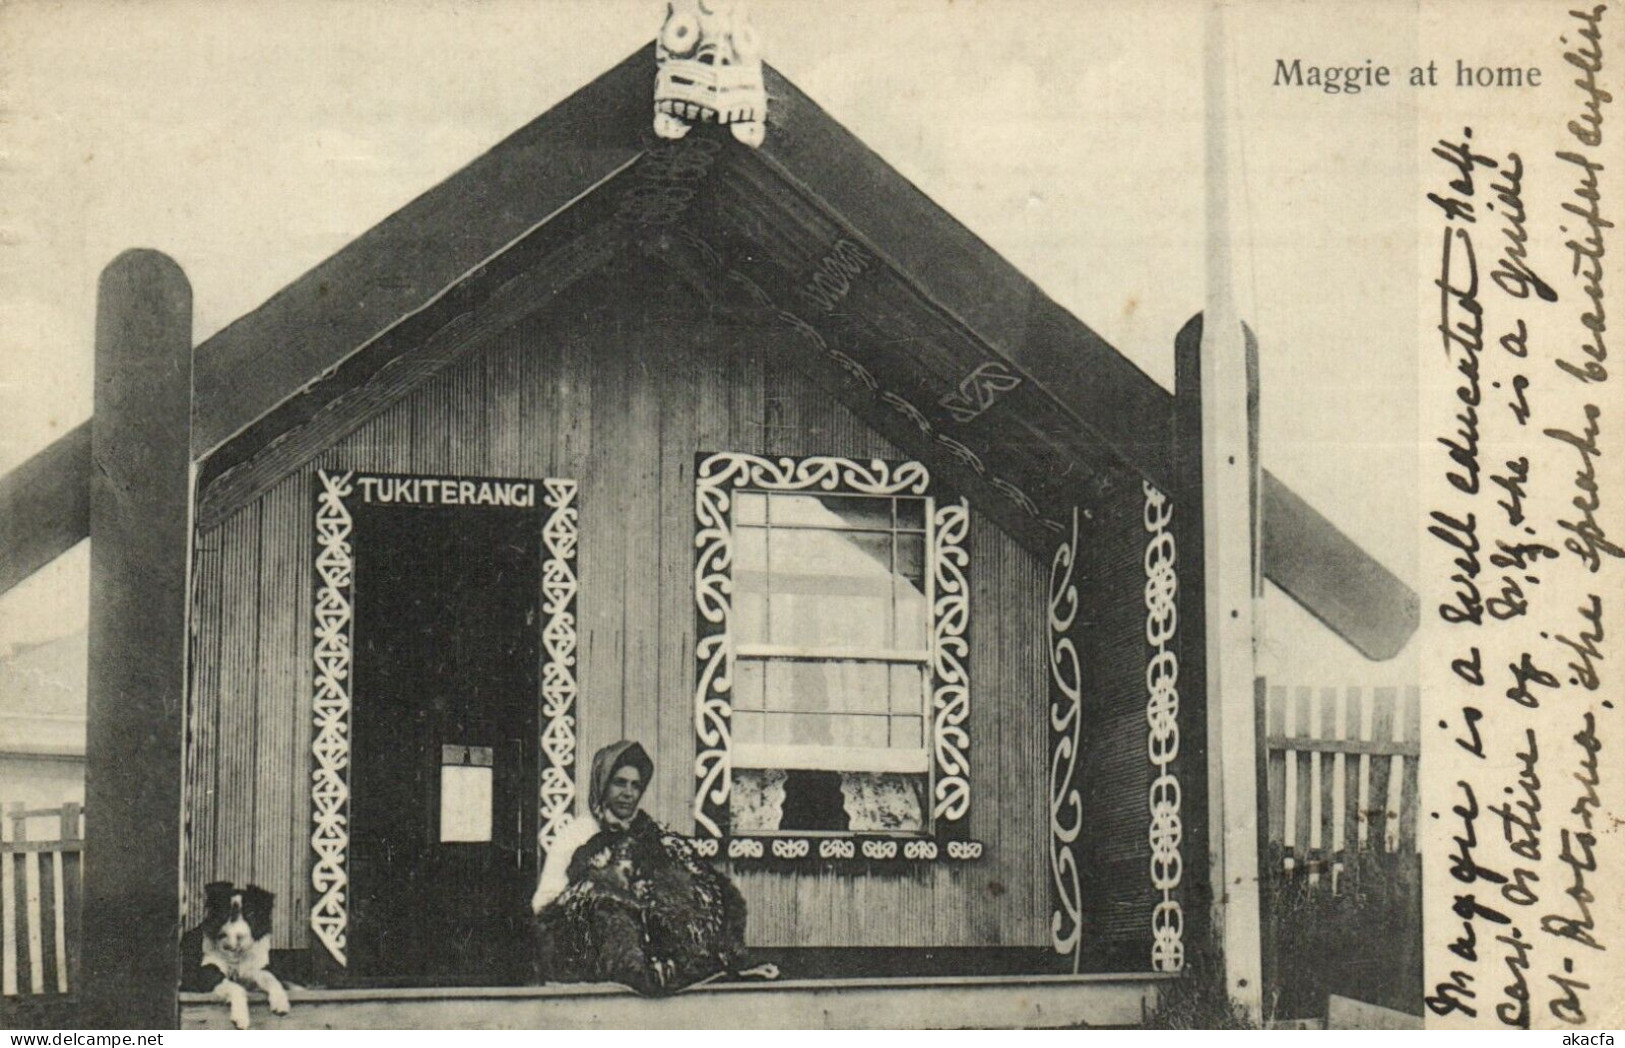 PC NEW ZEALAND MAGGIE AT HOME, VINTAGE POSTCARD (b53644) - New Zealand